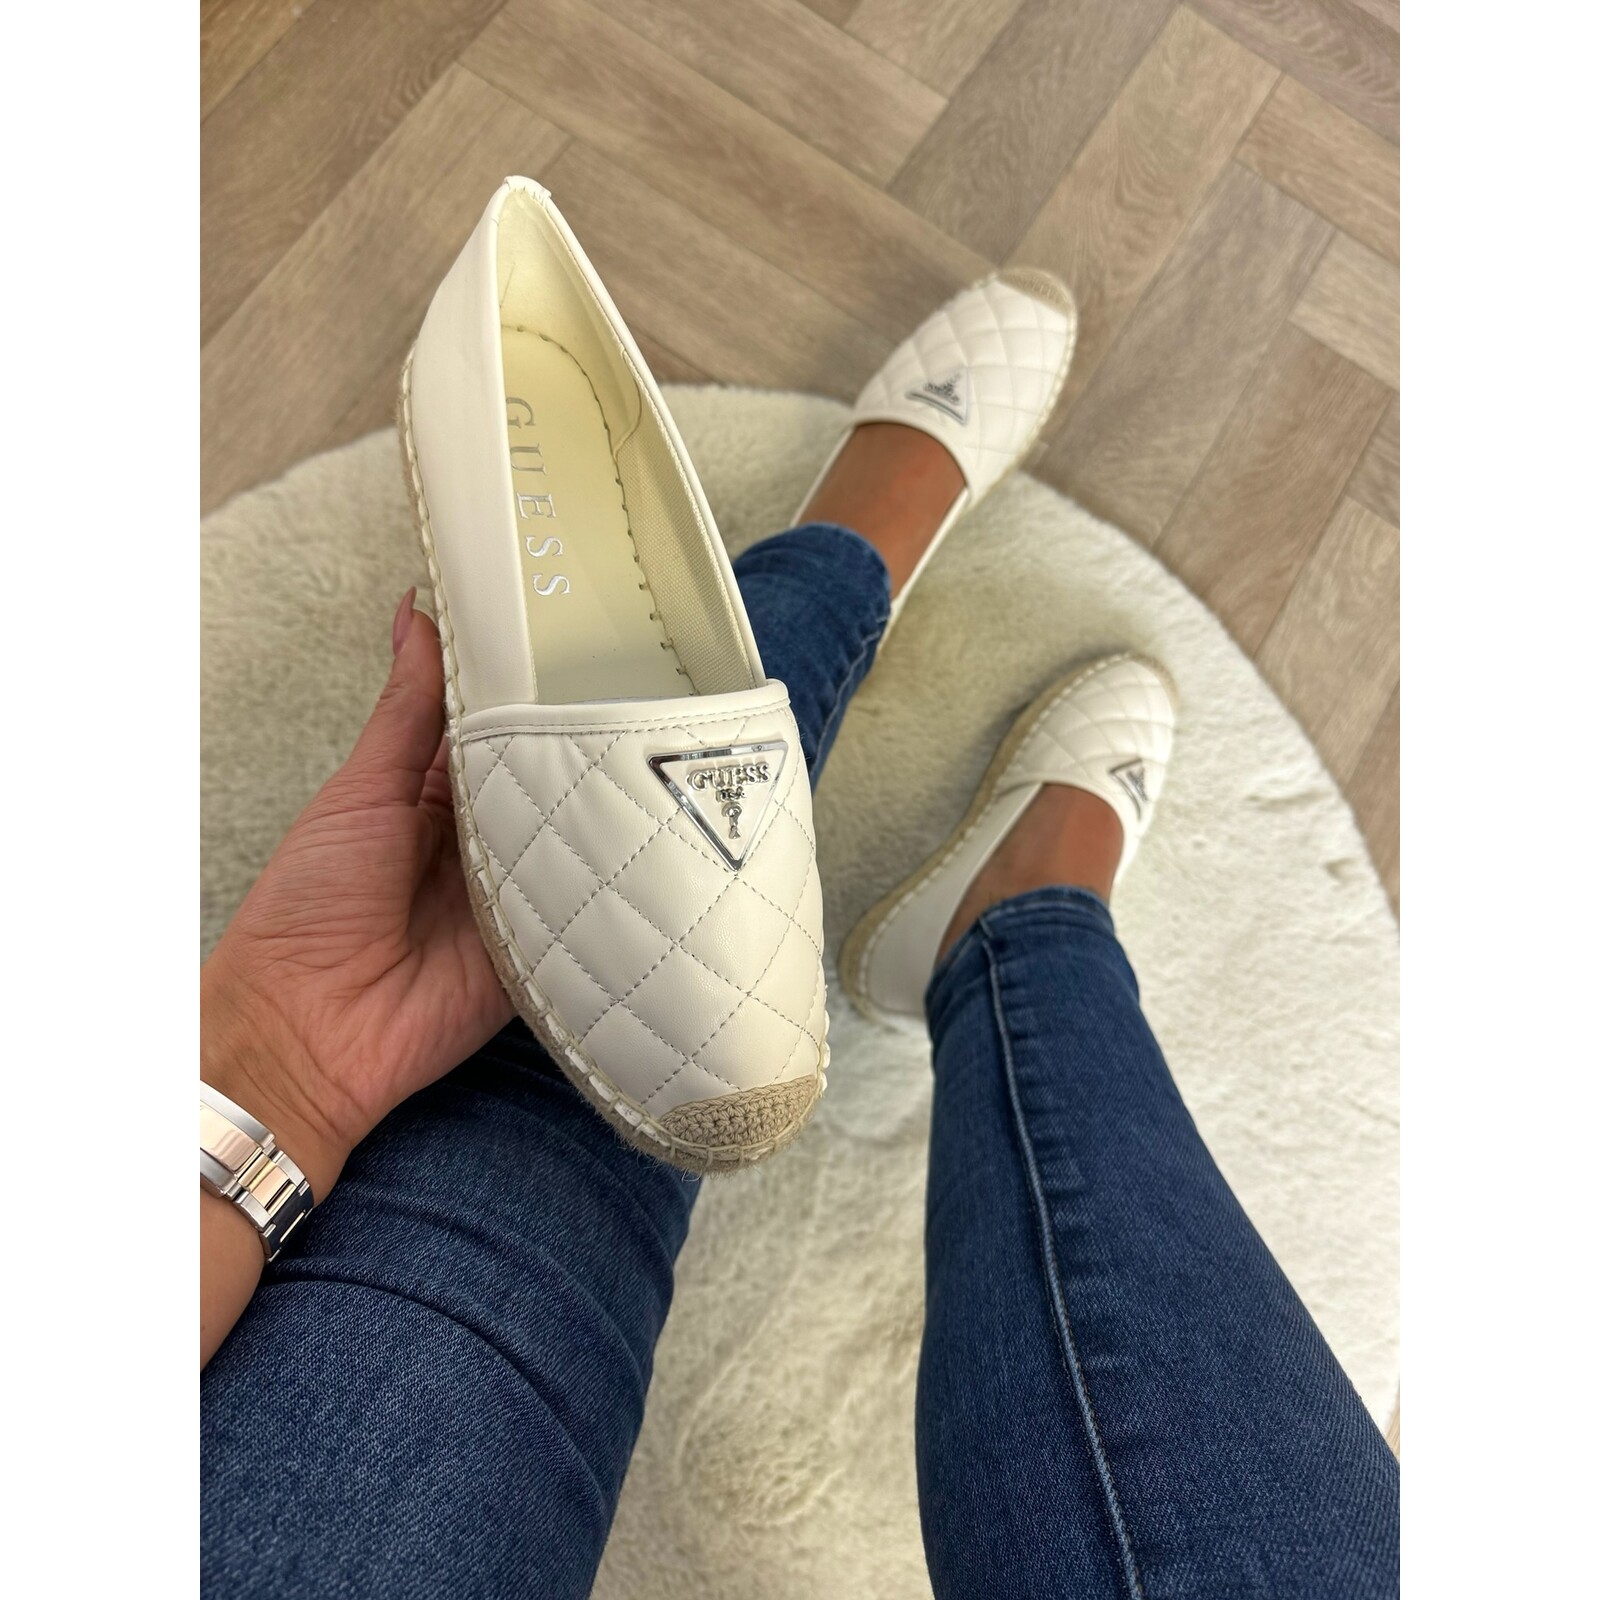 Guess Espadrilles Triangle Logo Off White Guess 828